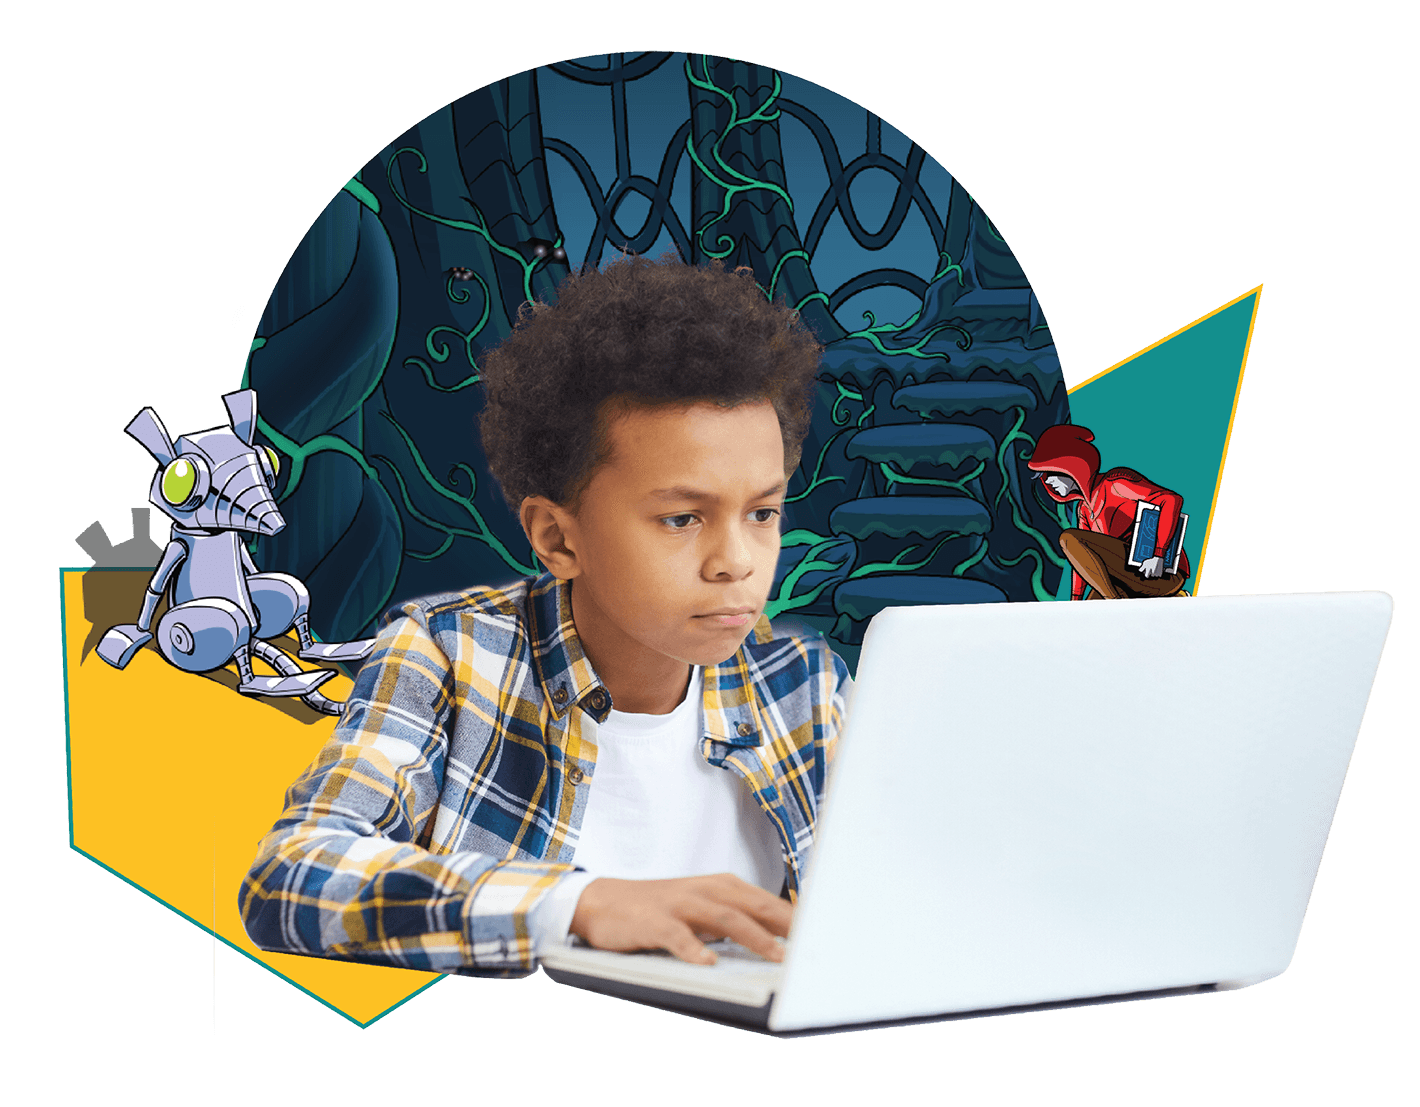 Young boy concentrating on laptop with imaginative illustrations of robots and Amplify Reading graphics in the background.